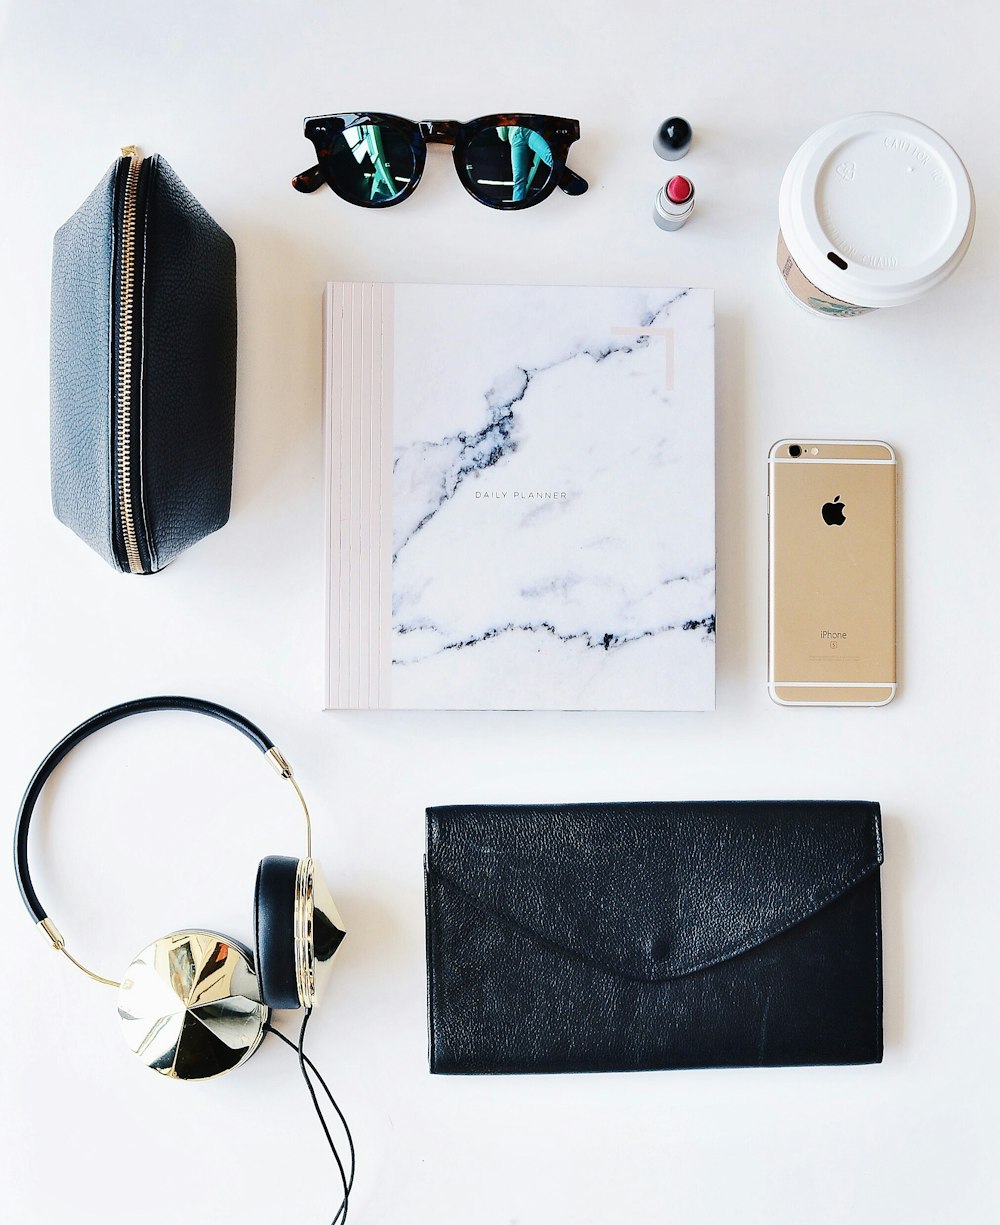 A flatlay image of paper, a smartphone, cup of coffee, glasses and various other items.